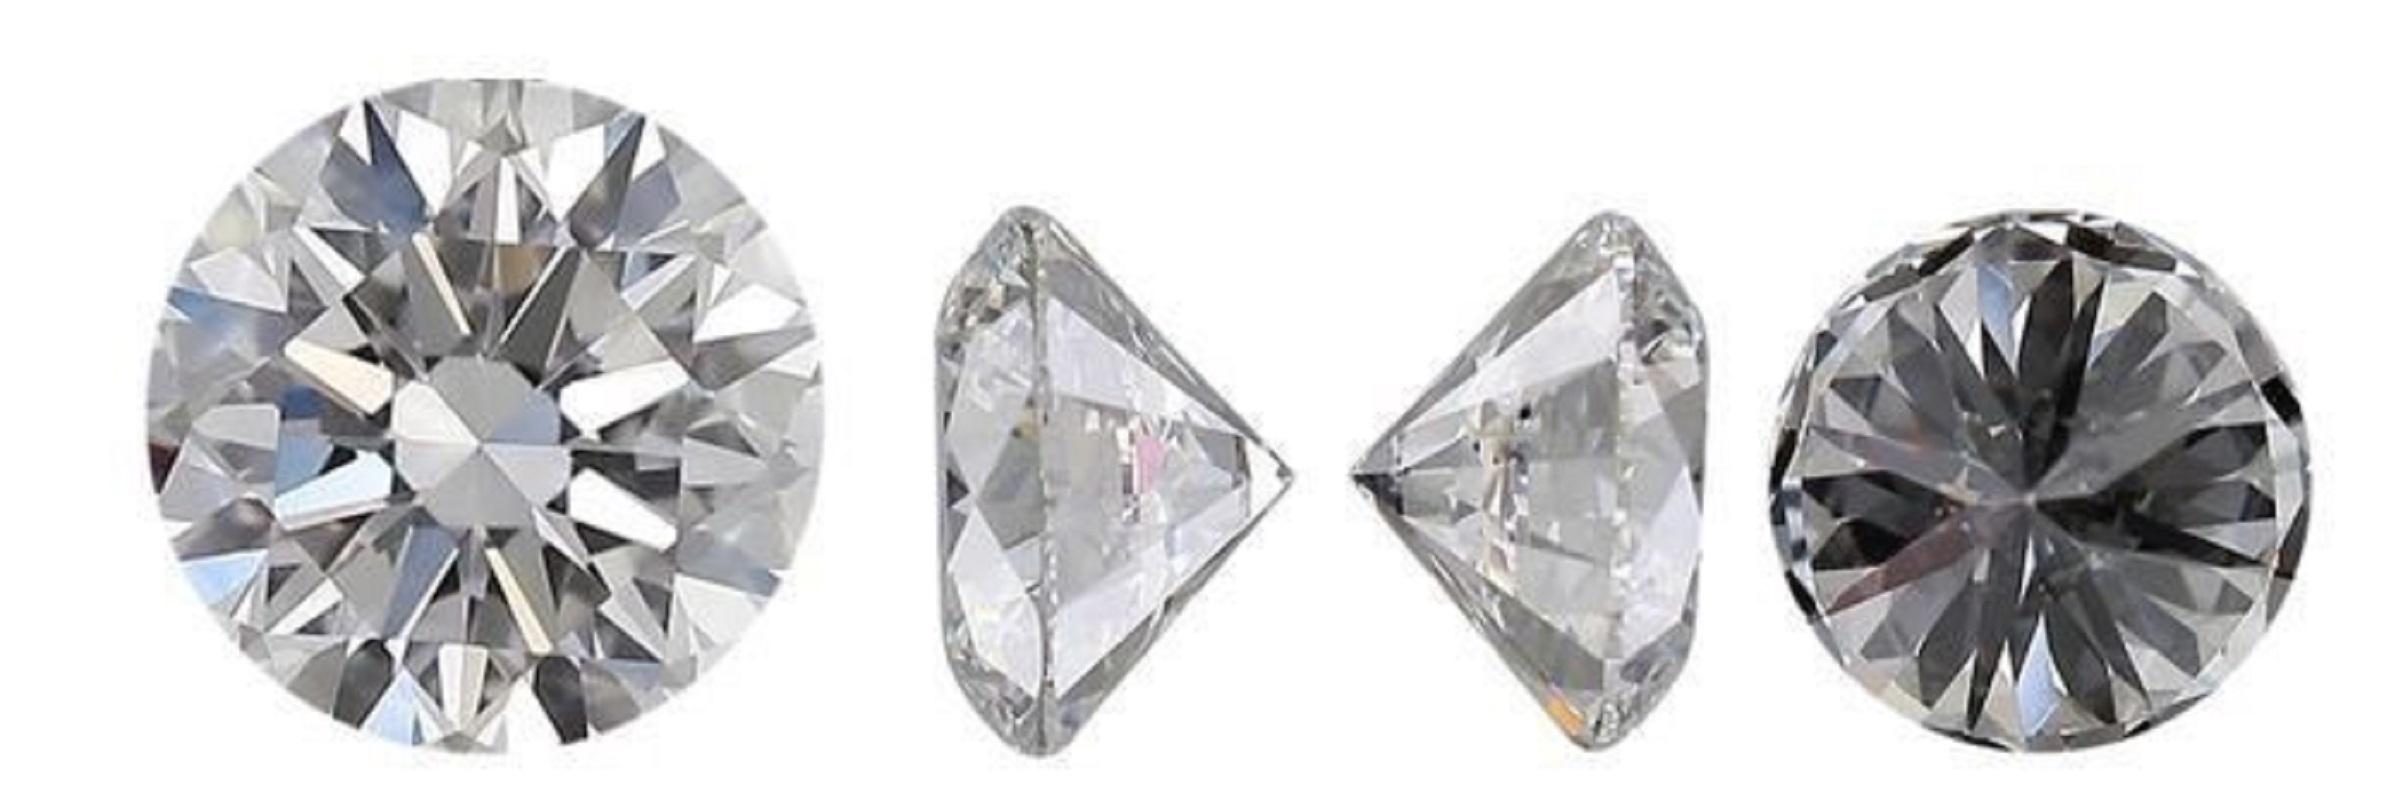 2 pcs Diamonds - 1.80 ct - Round - H - VVS1, GIA Certificate
GIA
Sparkling and stunning pair of natural cut round brilliant diamonds in a total of 1.80 carat H VVS1 excellent ideal cut with mesurments of one carat 6.35 mm .
These diamonds come with